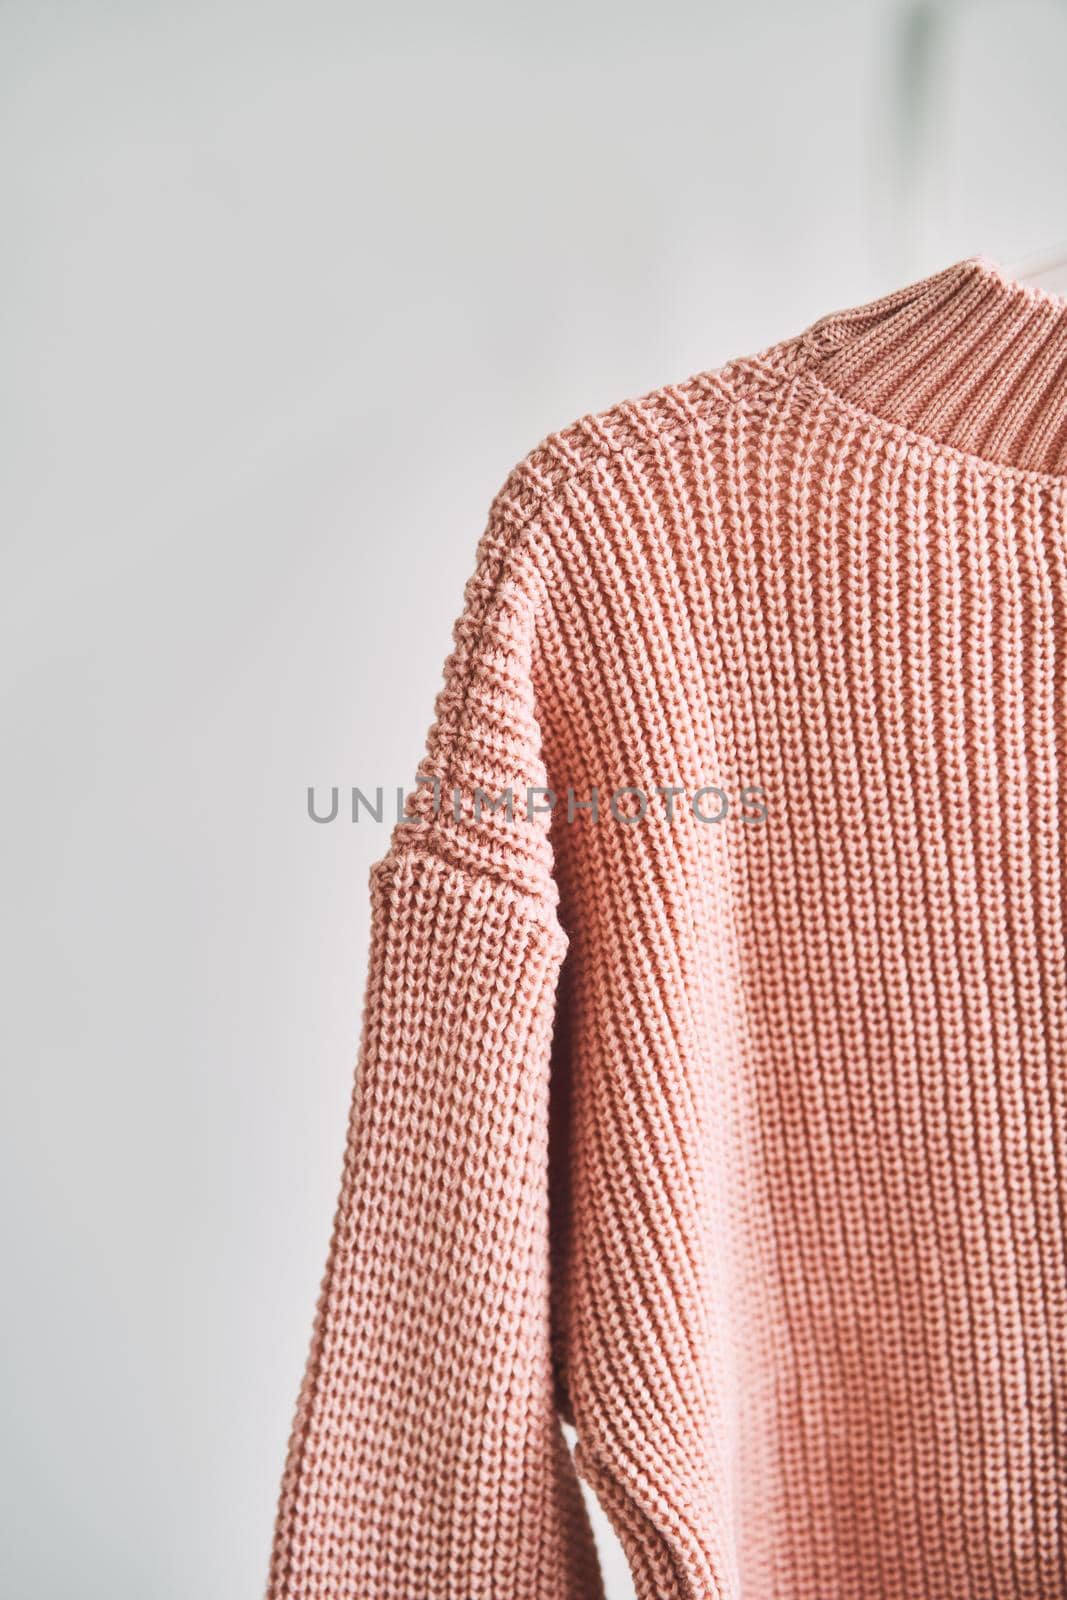 A woolen sweater hanging on a hanger on a white background. Warm clothes sale. Concept - everything is sold out in a clothing store.